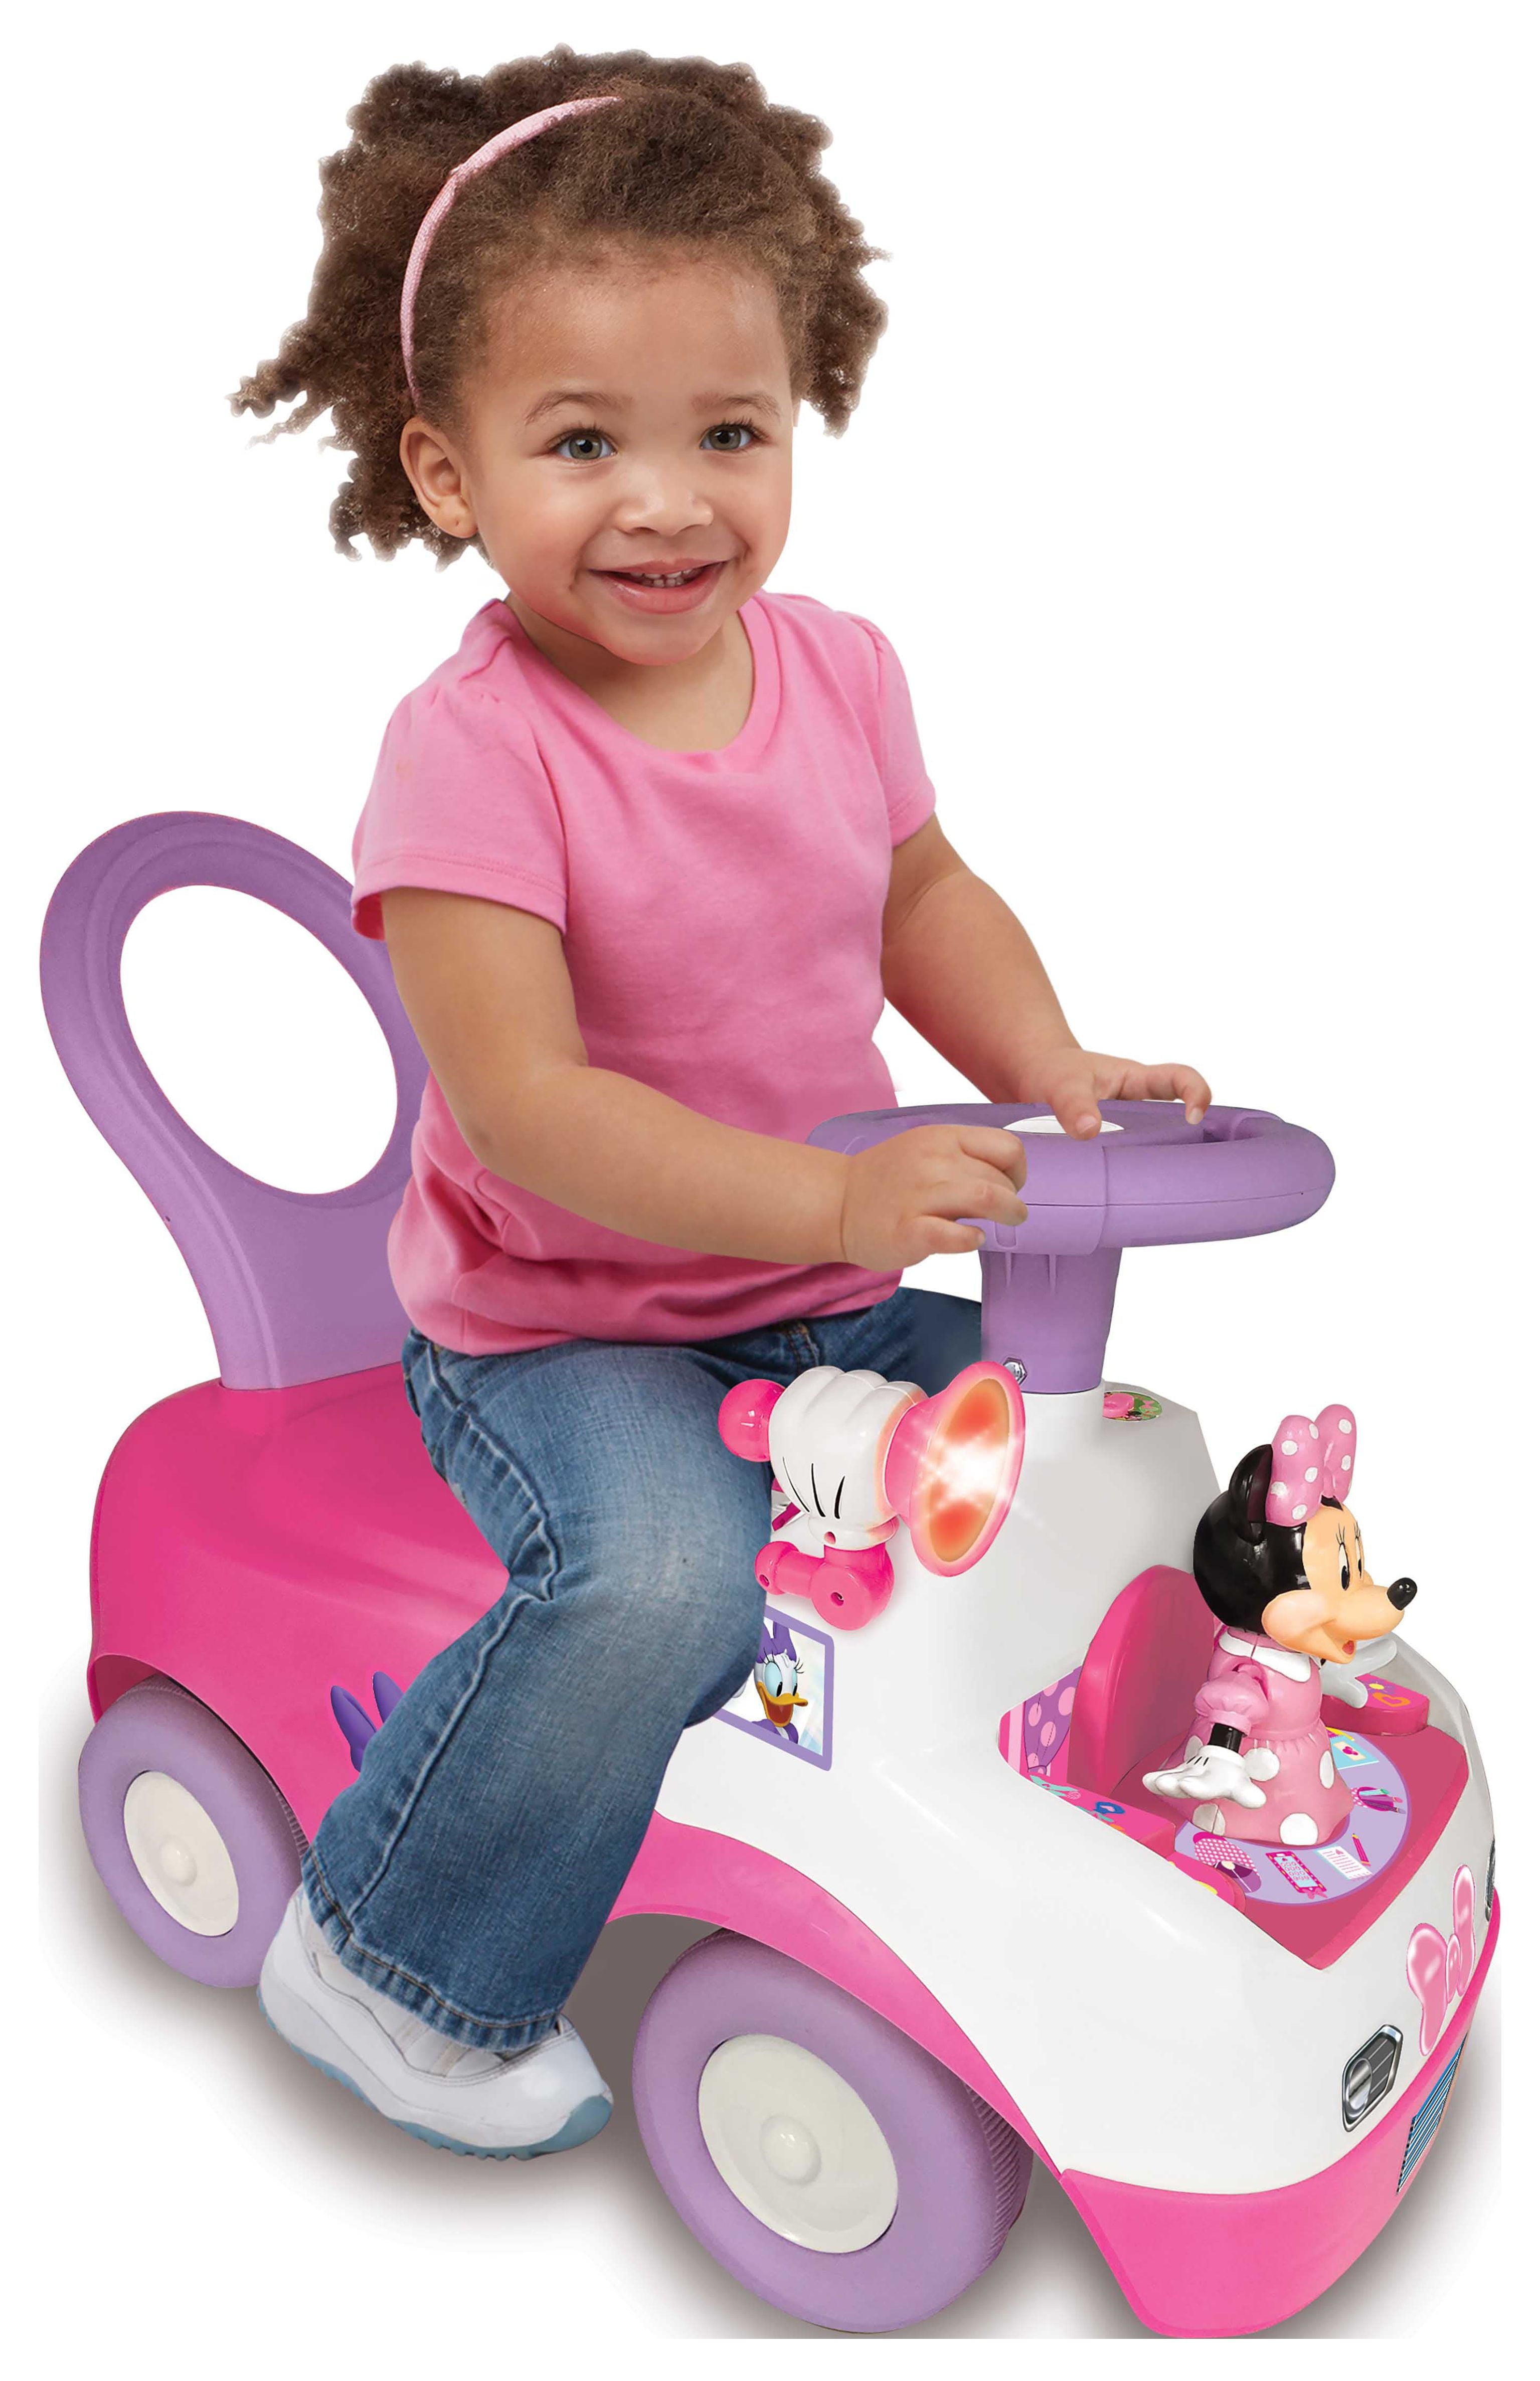 Activity Ride-On Minnie Interactive Sounds Kiddieland with Dancing Car Mouse